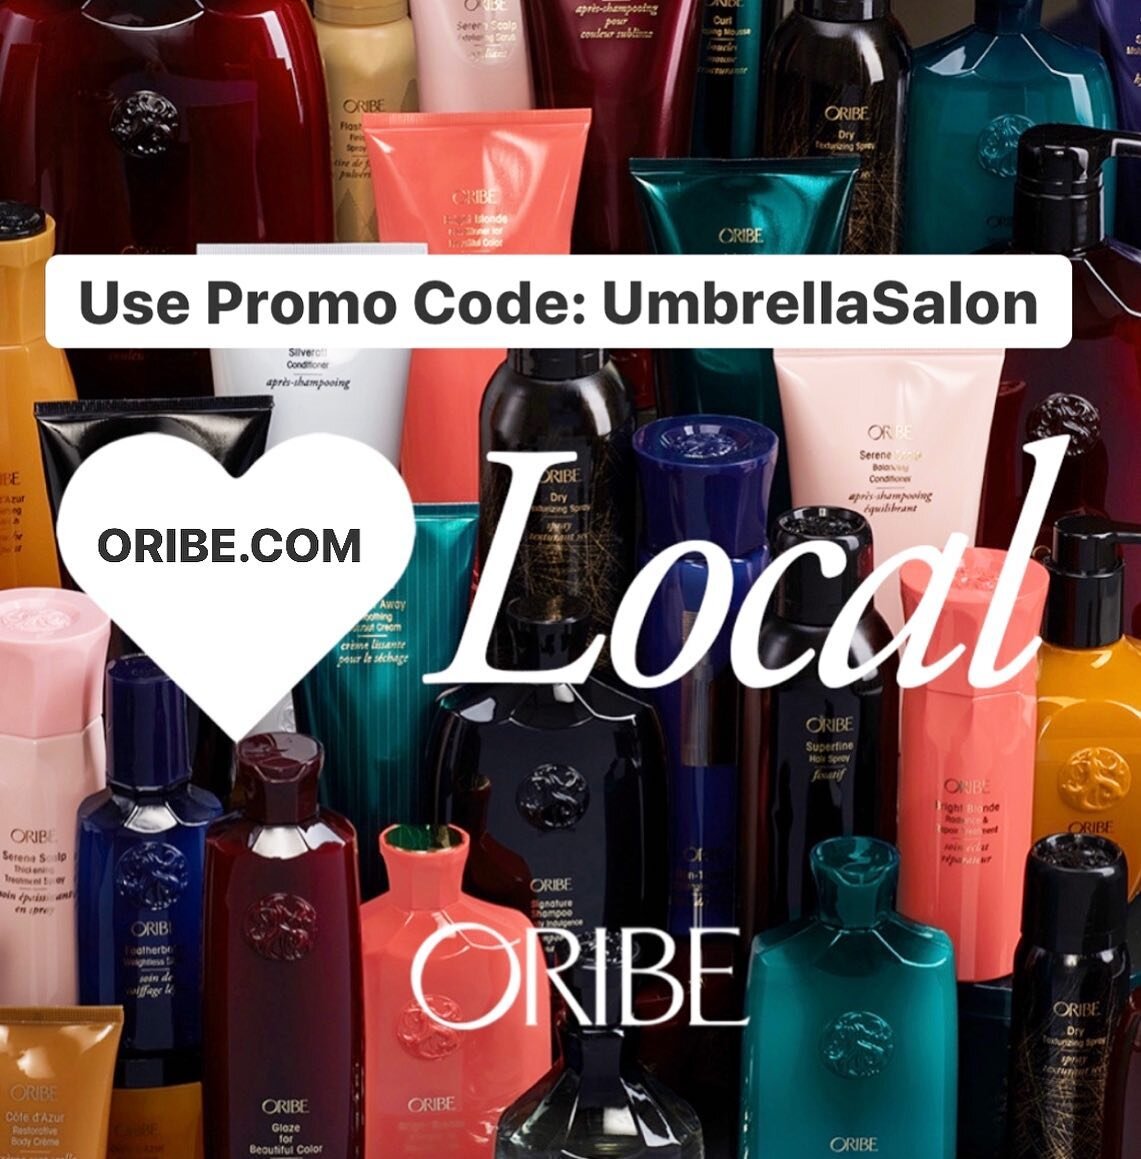 To our Umbrella Salon family -
We are thinking of you all and hope you are healthy and doing well!

During this time, our amazing partners at Oribe have launched a program to help Umbrella Salon generate an income while we are temporarily closed. Thi